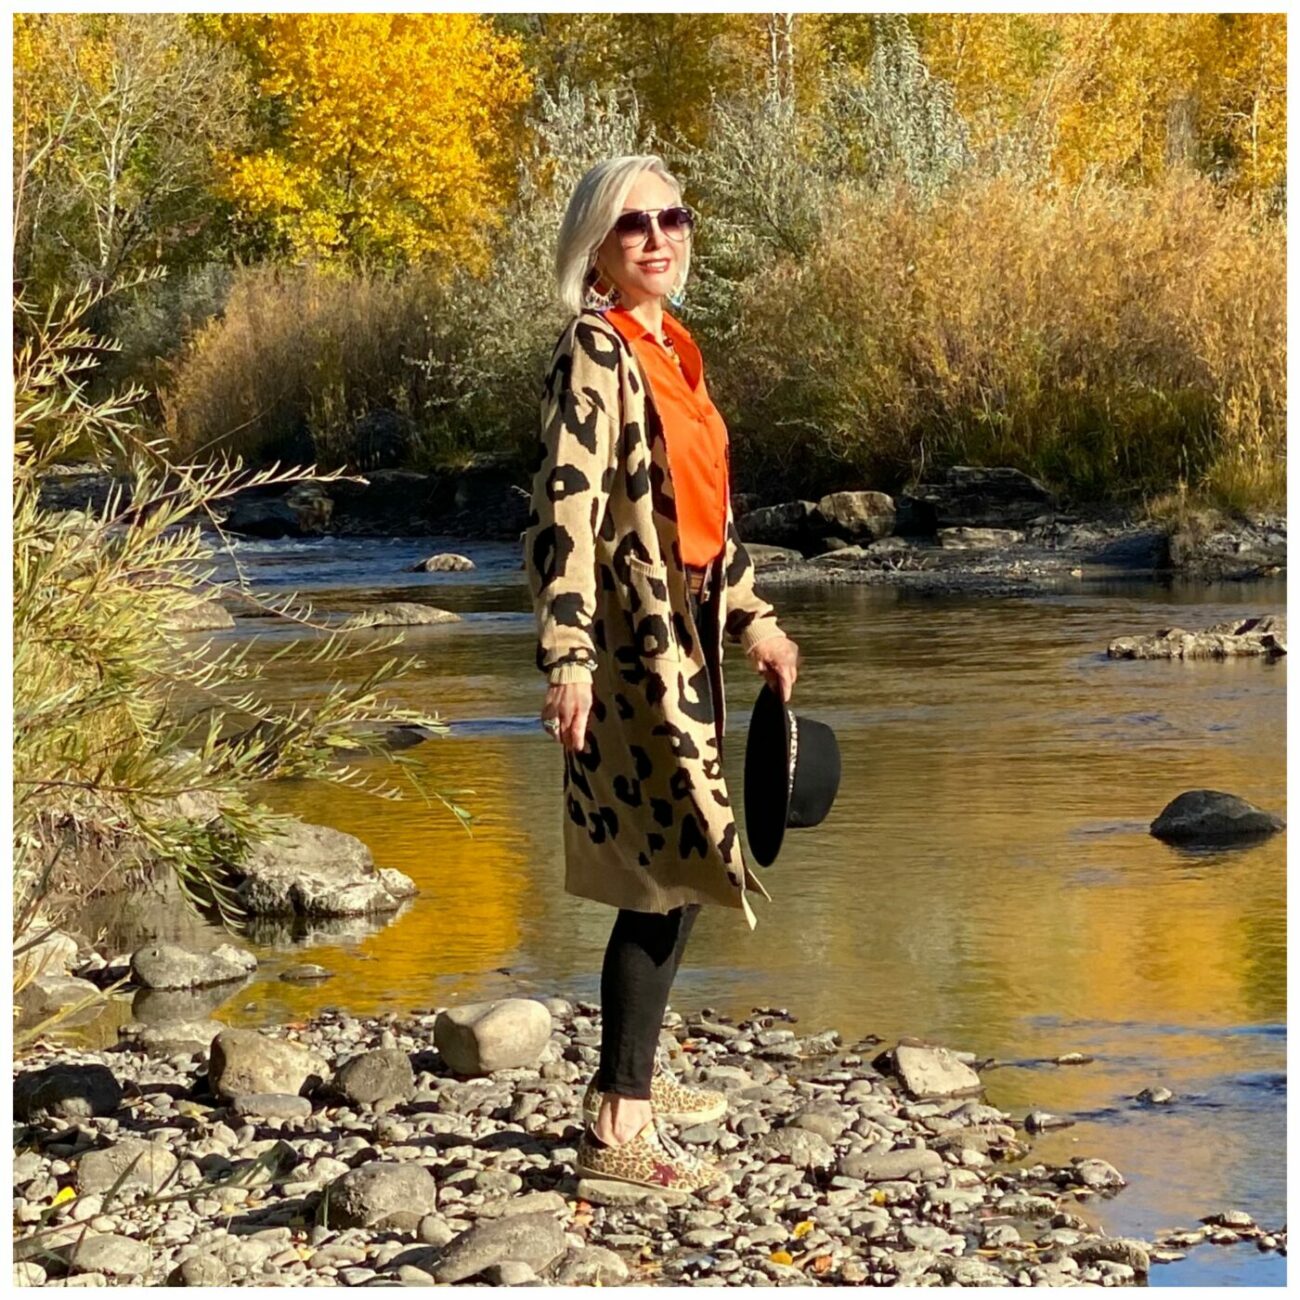 Sheree Frede of the SheShe Show standing on river rocks in the river wearing a lepard print cardigan, orange shirt and black jeans